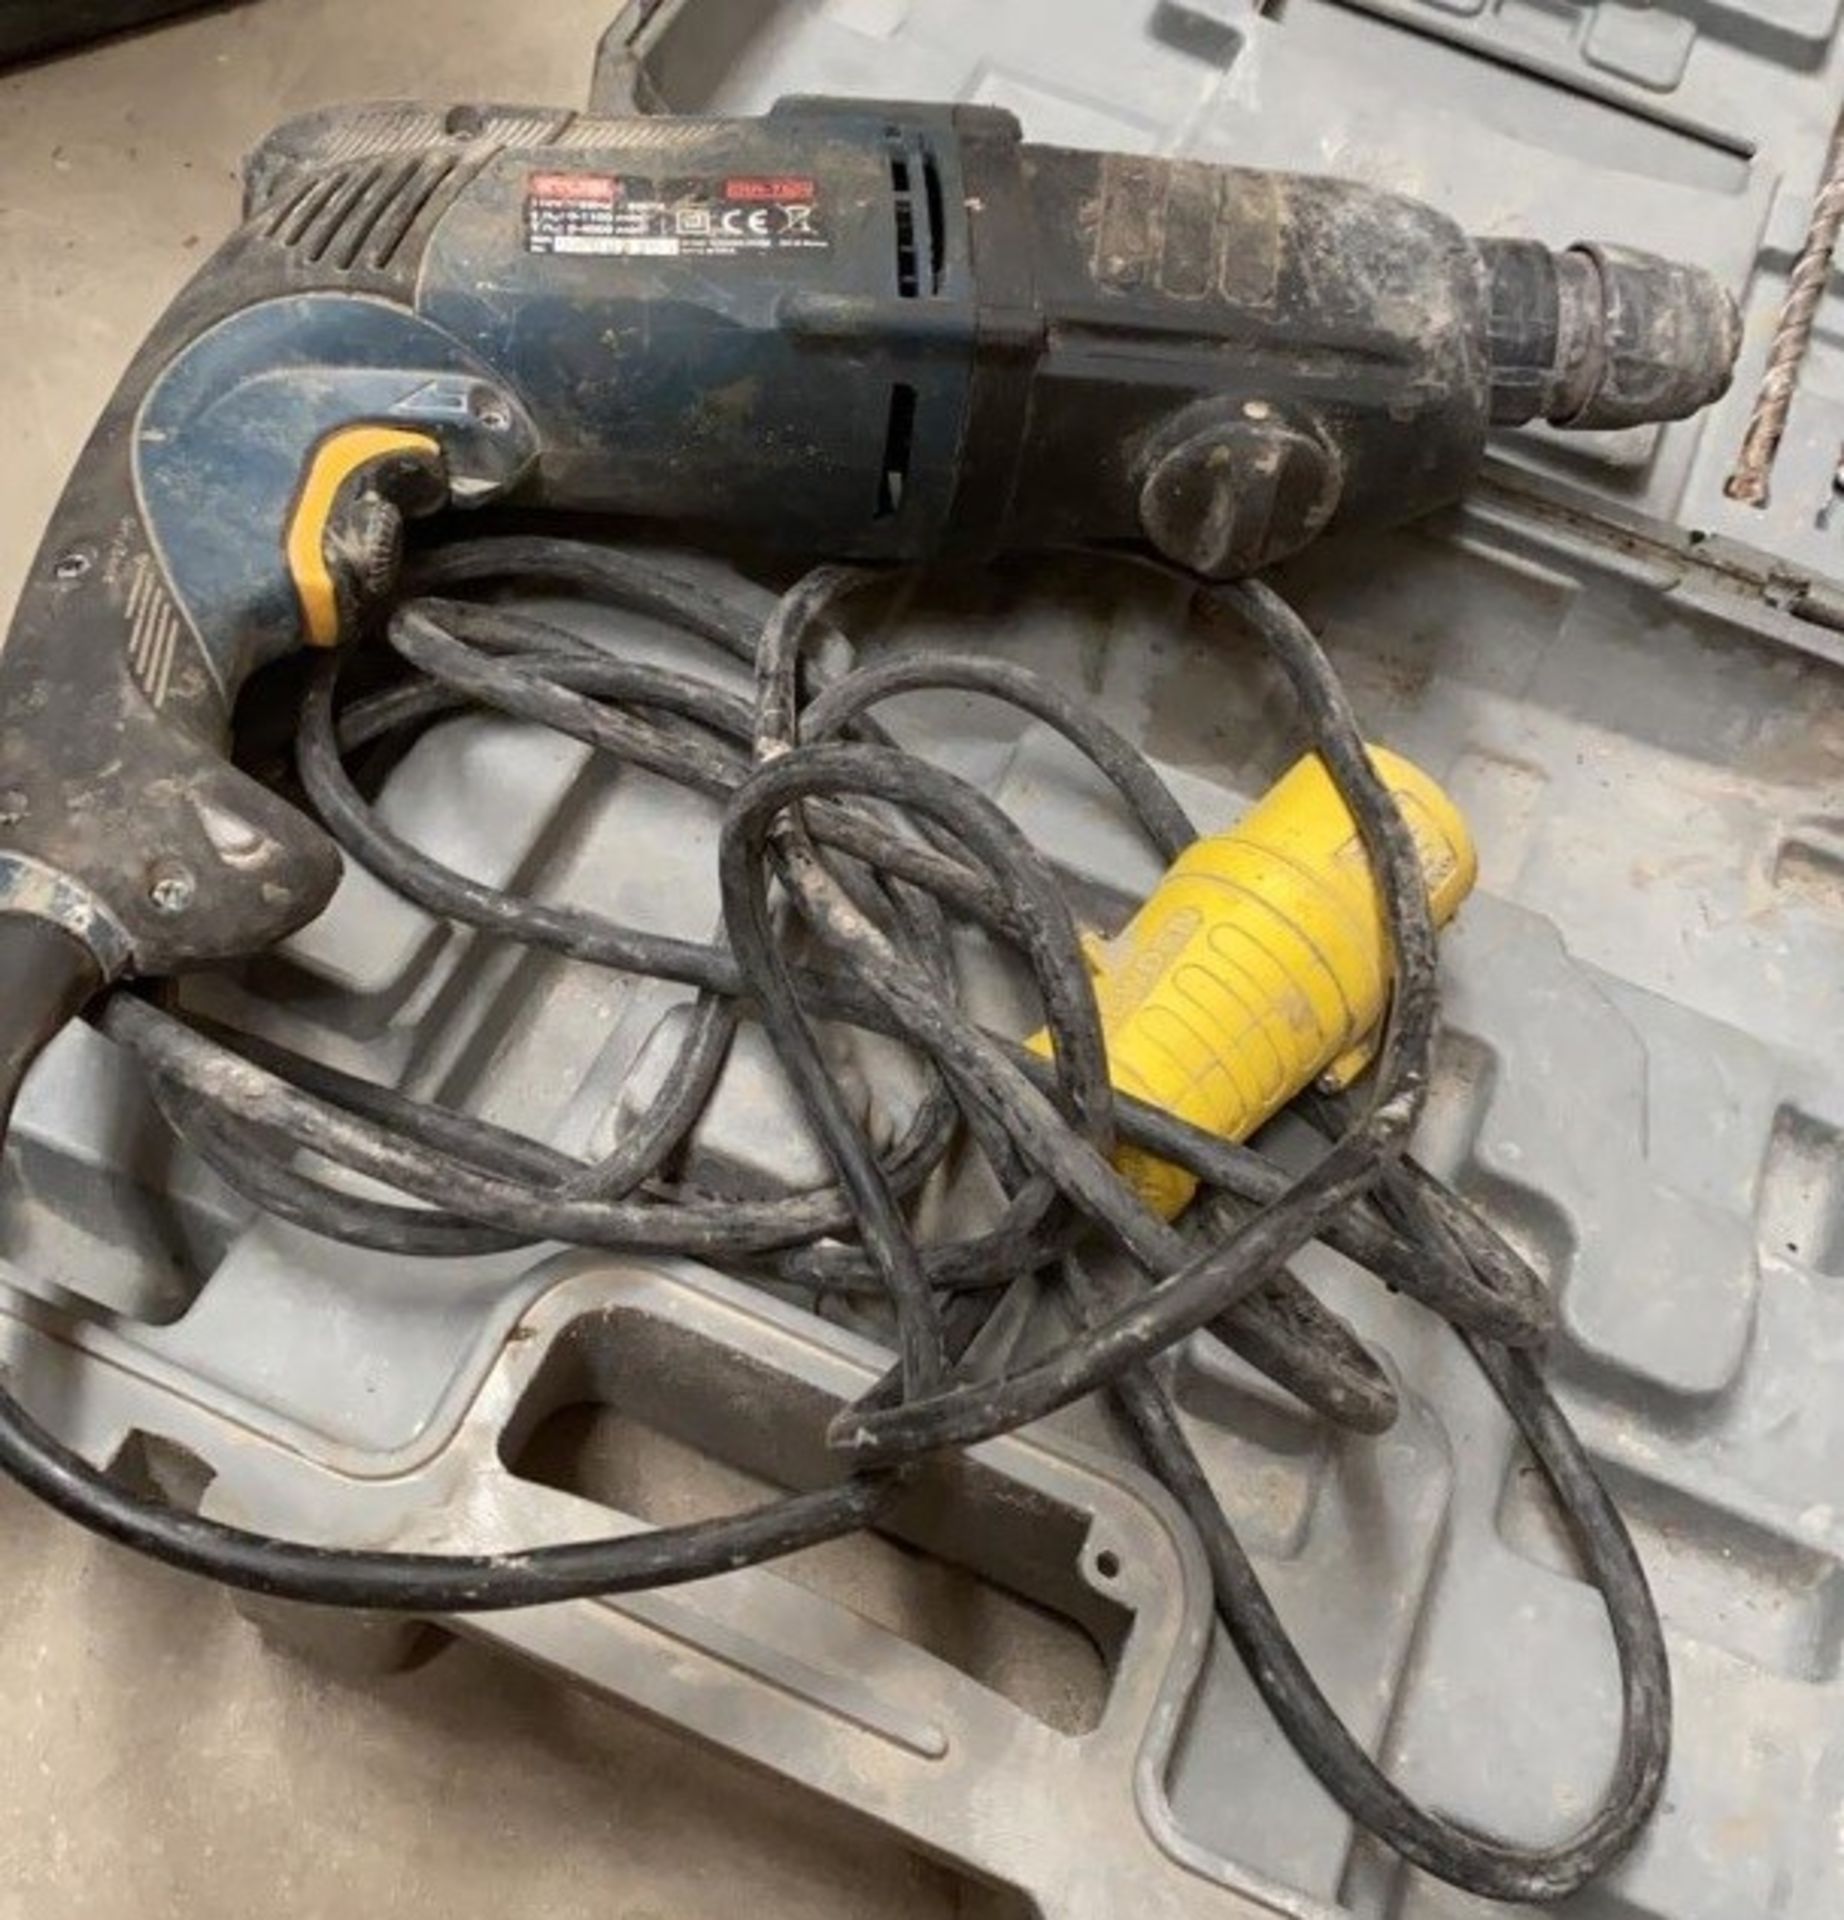 1 x Ryobi 110V Impact Drill - Used, Recently Removed From A Working Site - CL505 - Ref: TL027 - - Image 2 of 5